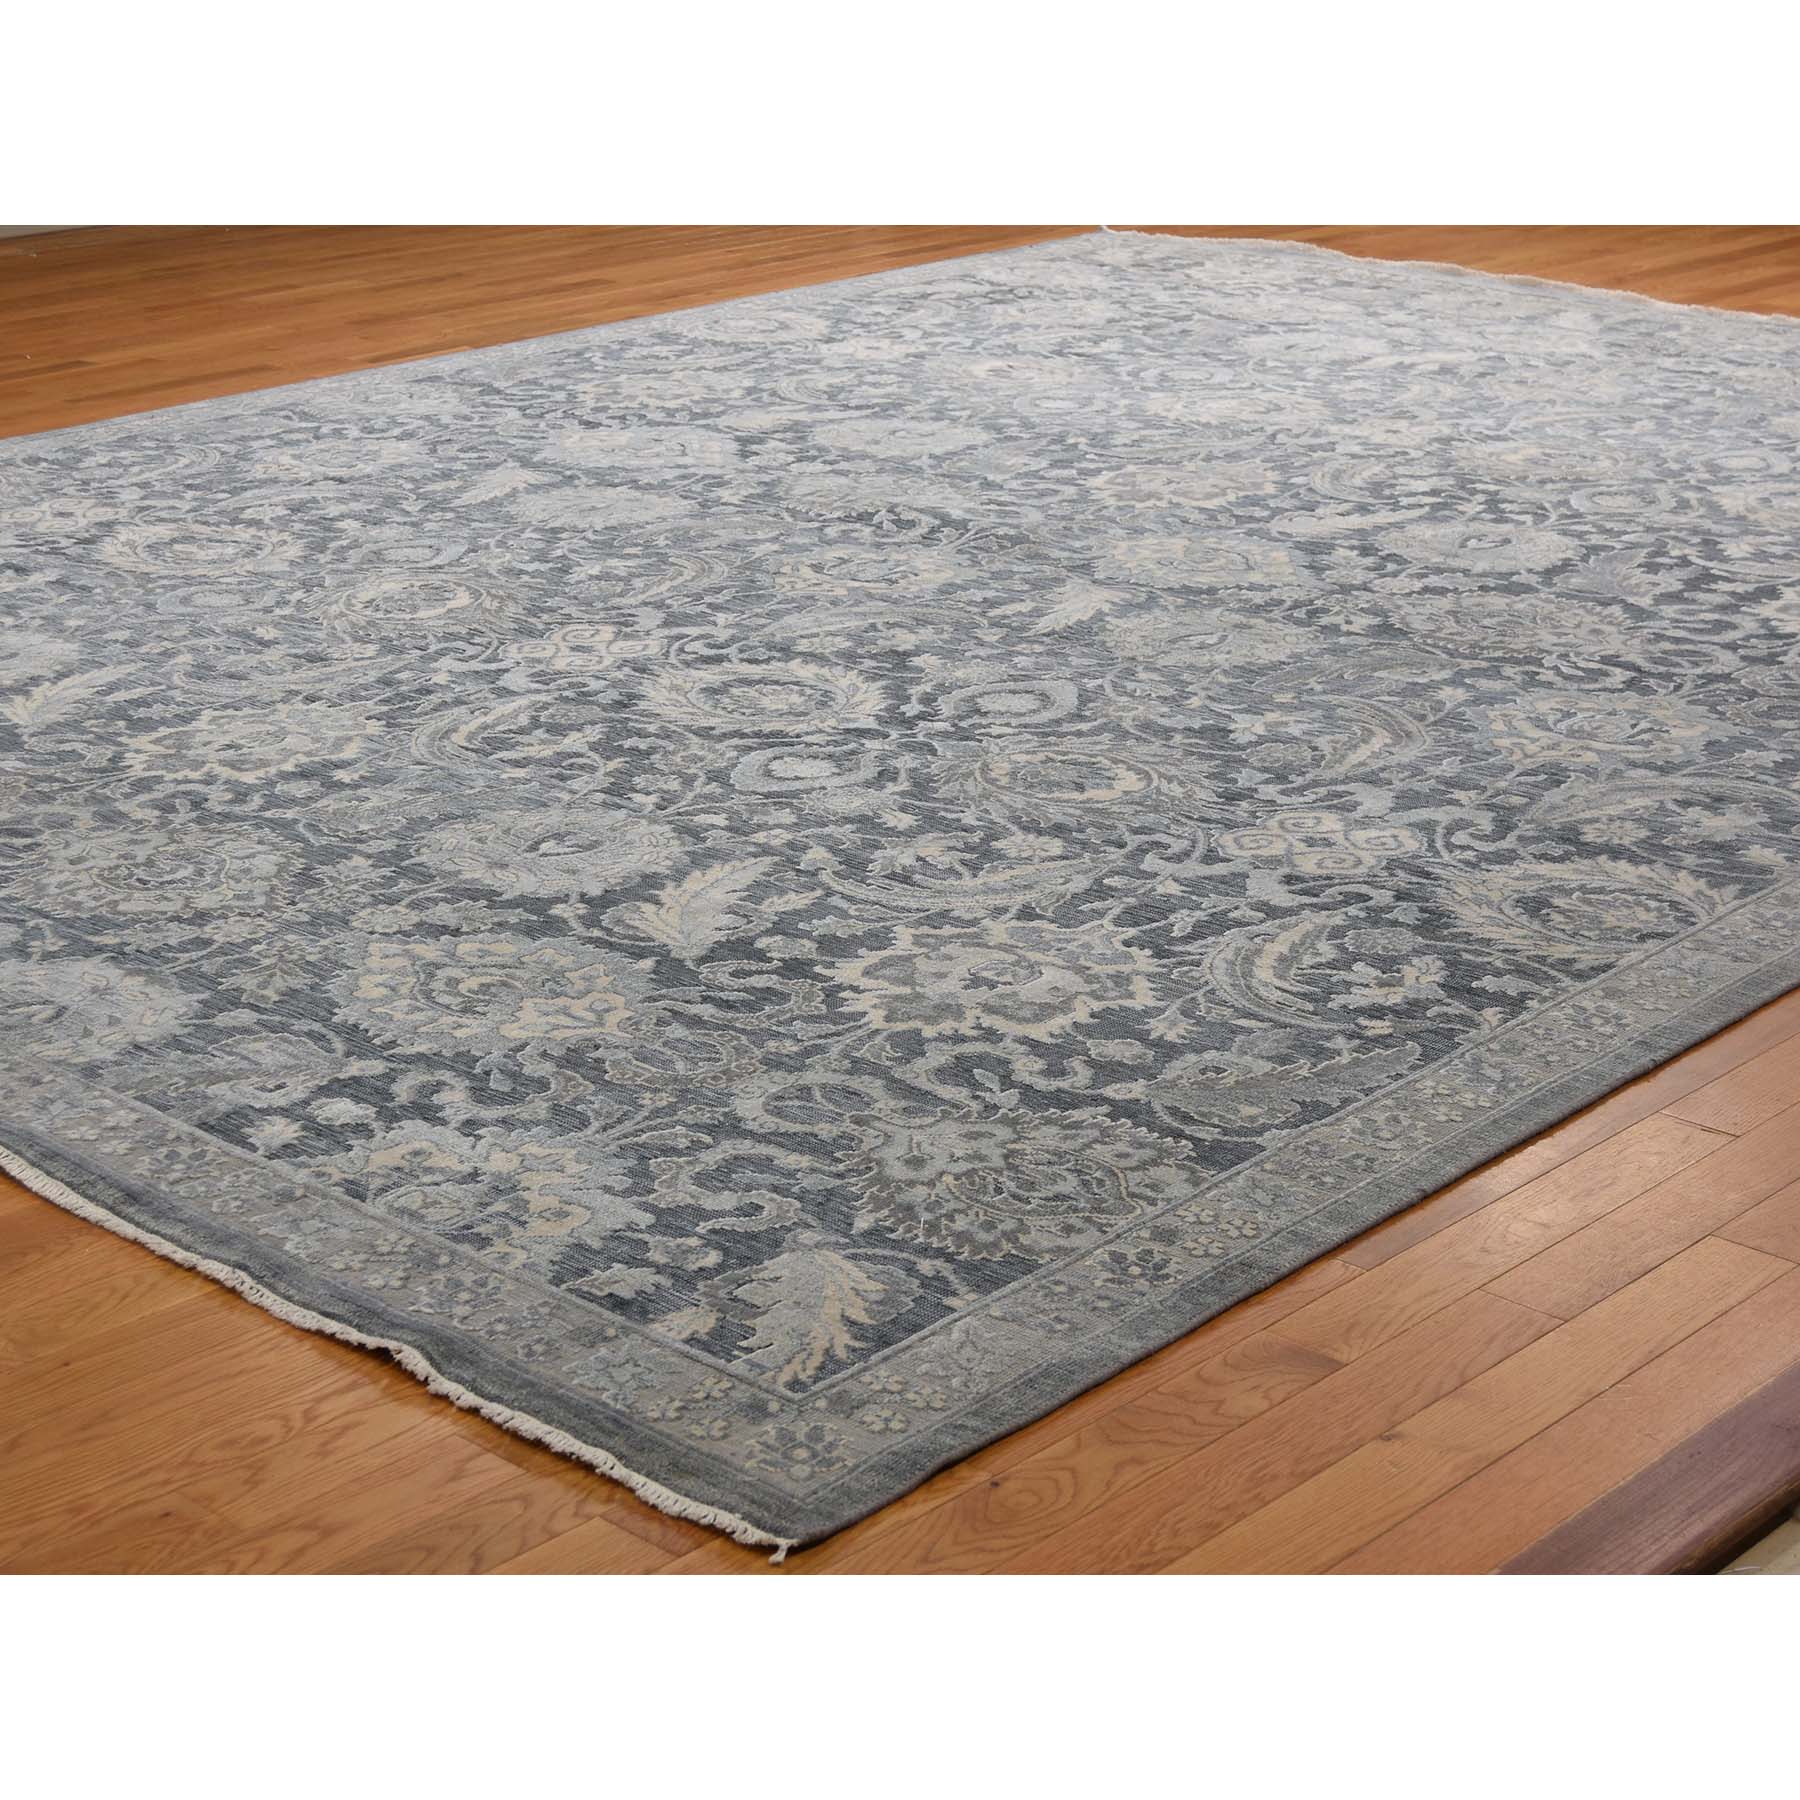 12'x15'10" Hand Woven Oushak Influence Silk with Textured Wool Oriental Rug 